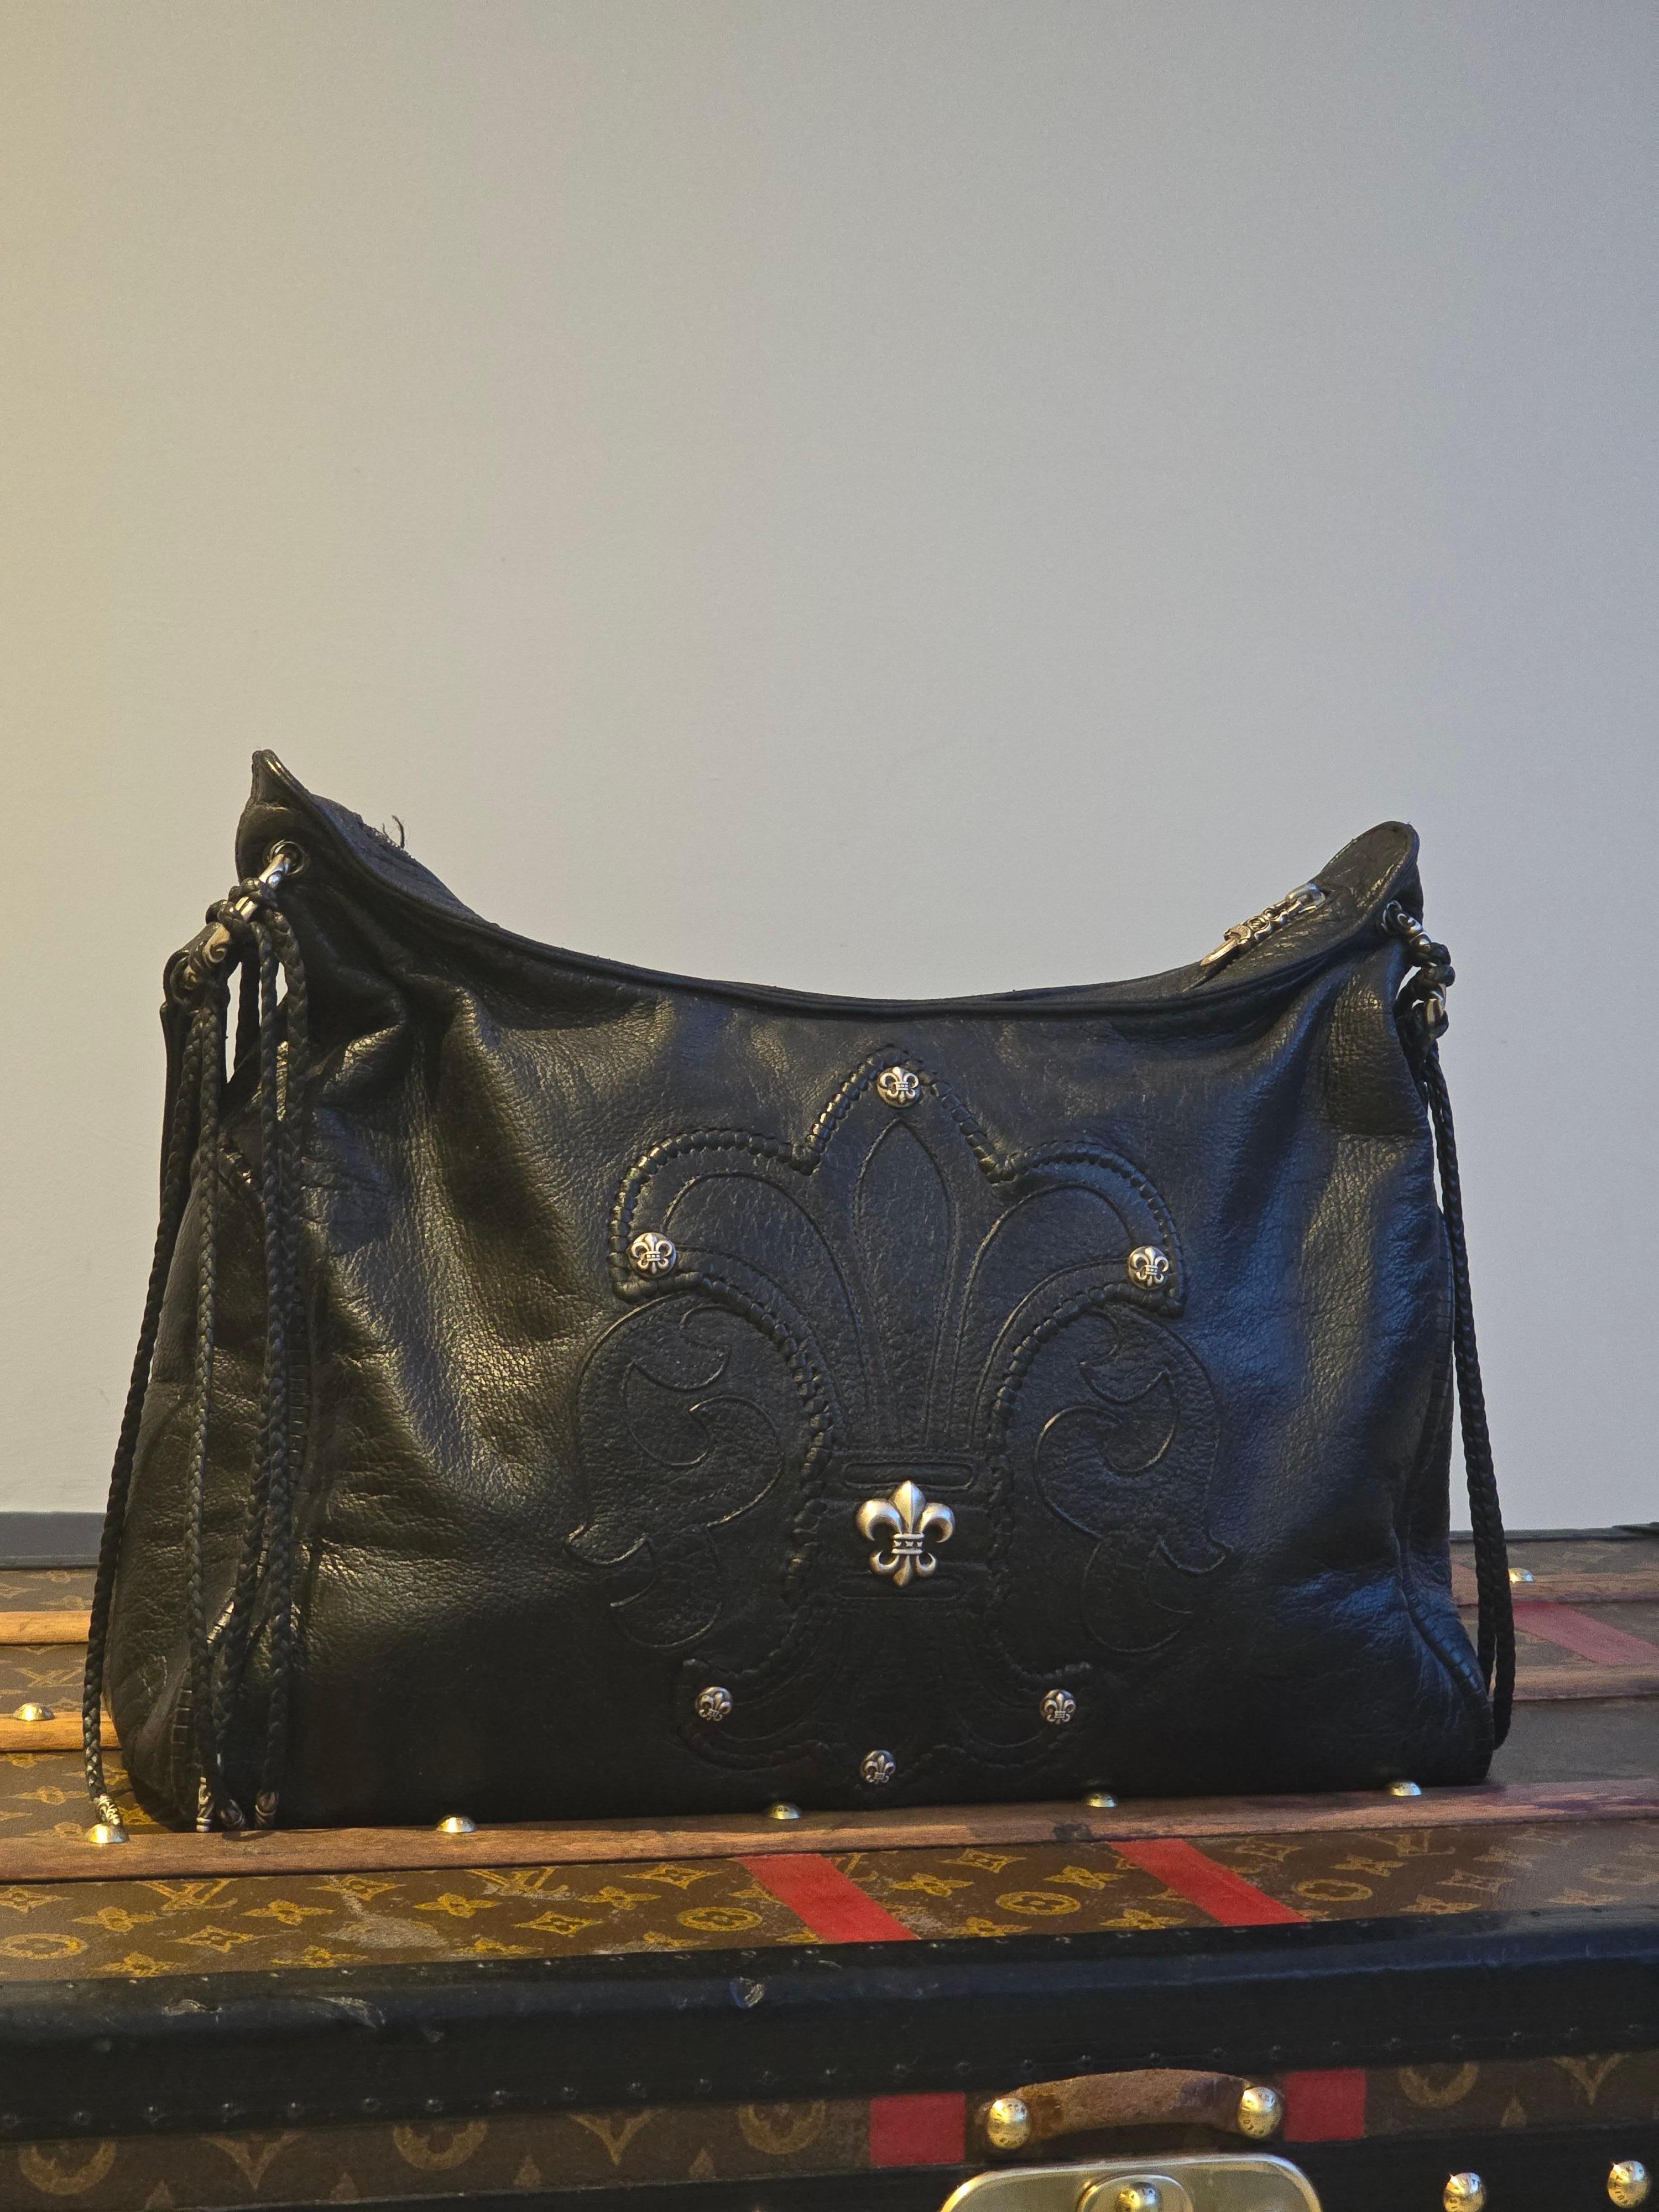 Immerse yourself in the epitome of edgy luxury with the Chrome Hearts Fleur De Lis Hobo Bag, a statement piece that melds the rebellious spirit of Chrome Hearts with the timeless elegance of high-end fashion. This exquisite bag is designed for those